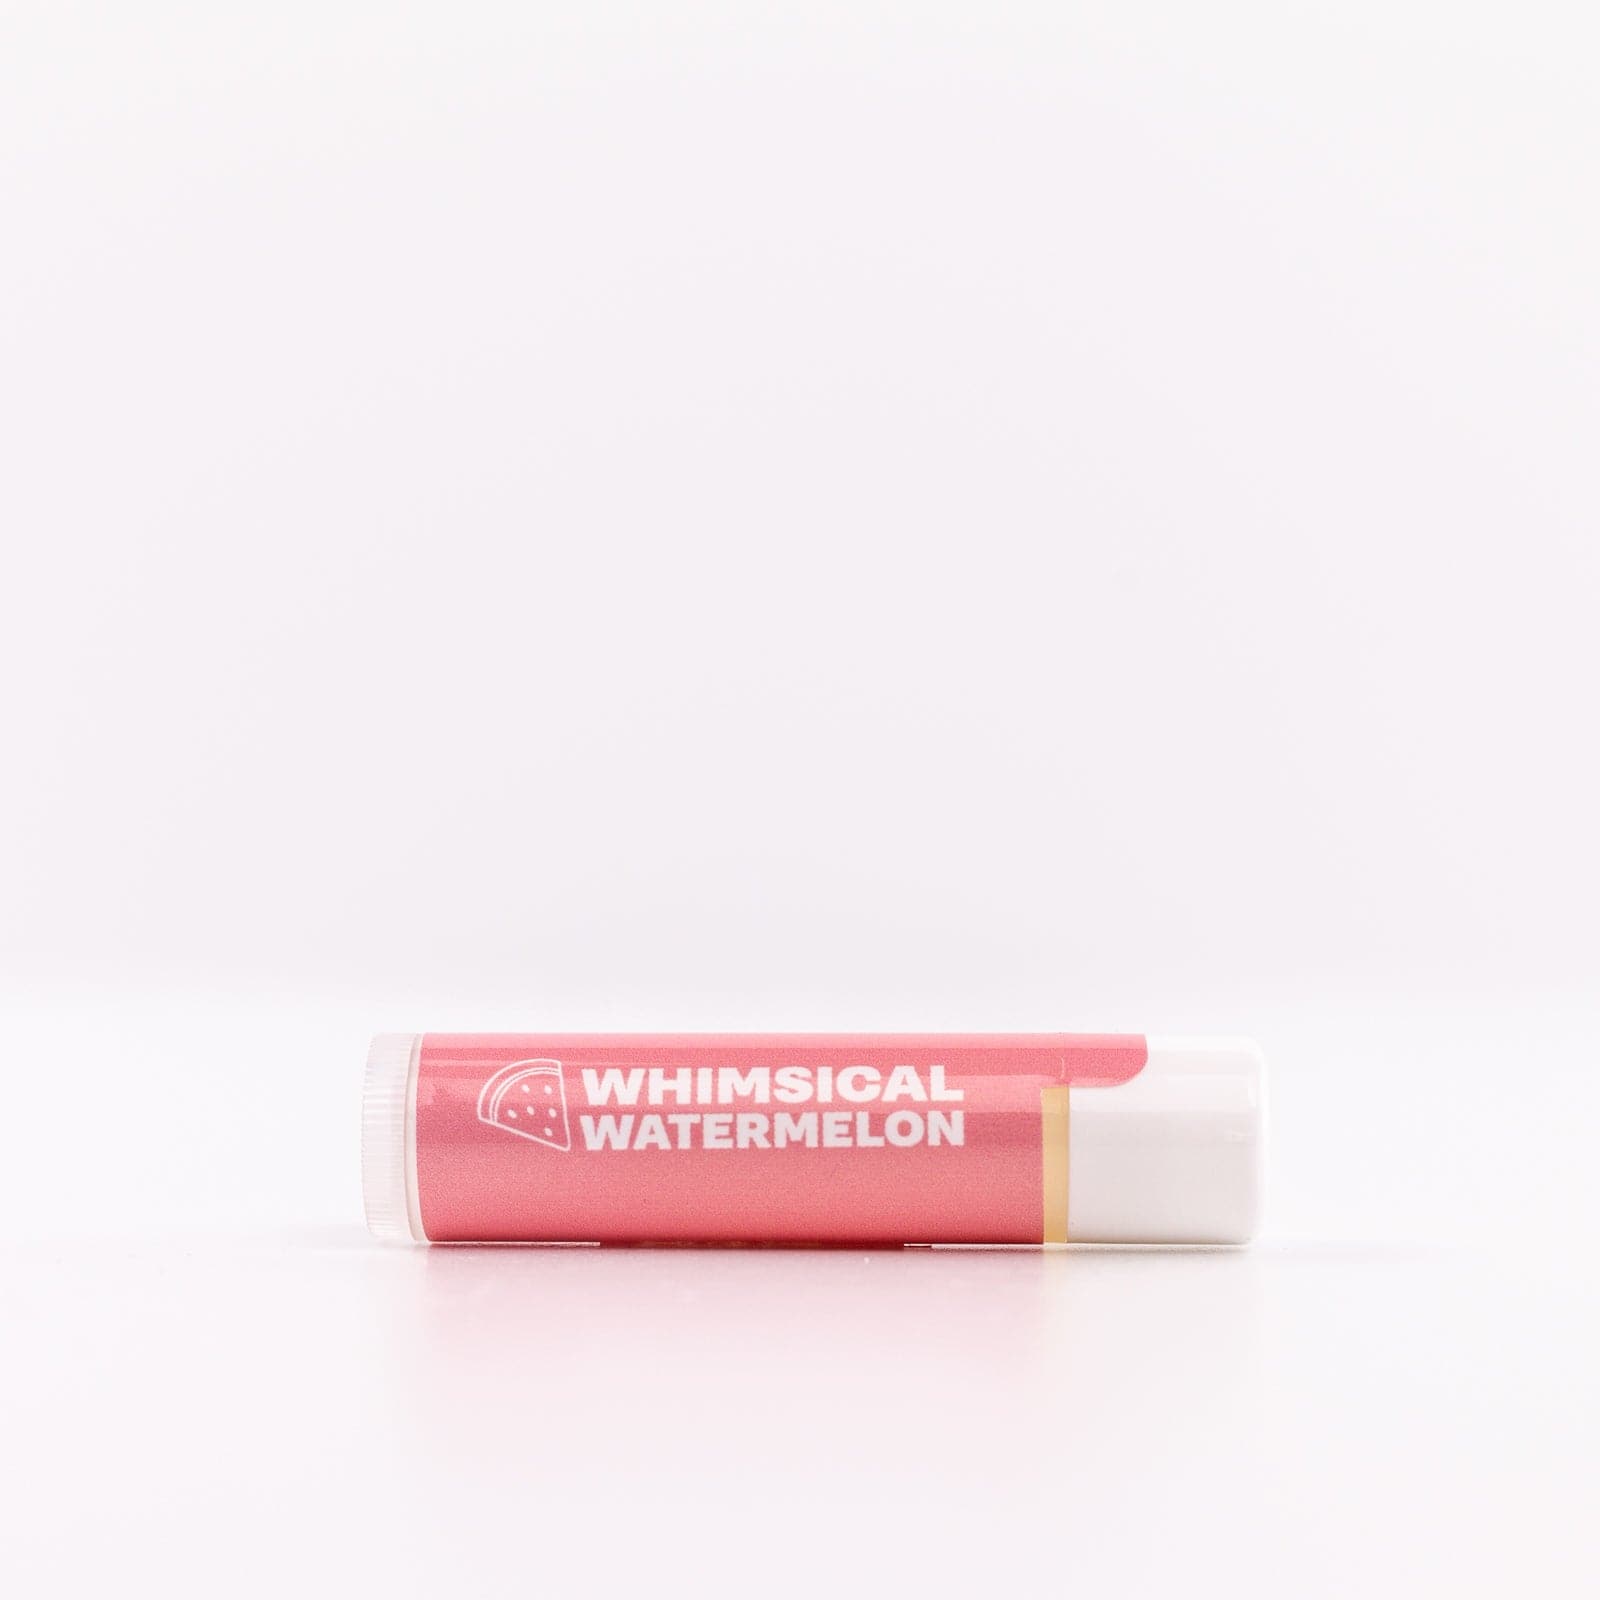 Whimsical Watermelon Lip Balm on its side